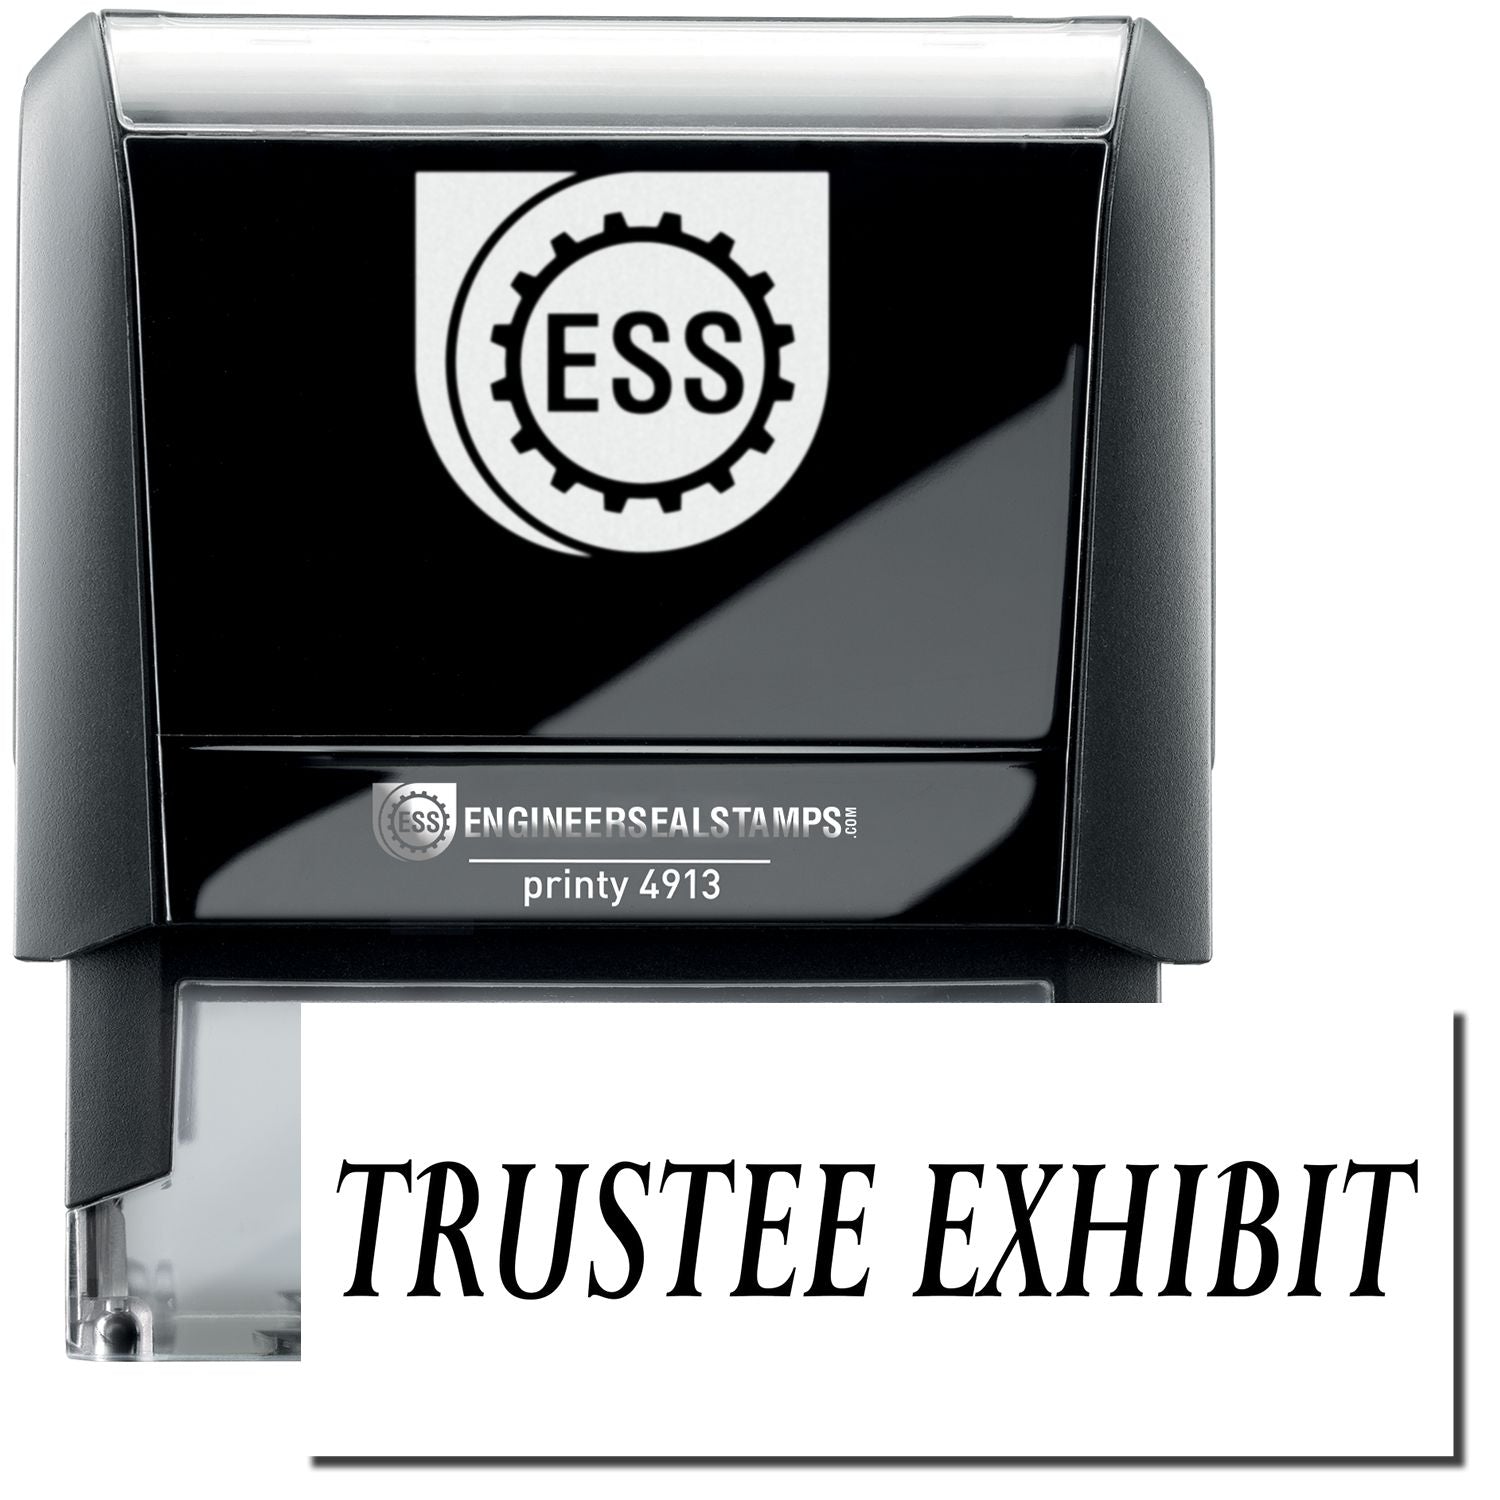 A self-inking stamp with a stamped image showing how the text "TRUSTEE EXHIBIT" in a large bold font is displayed by it.